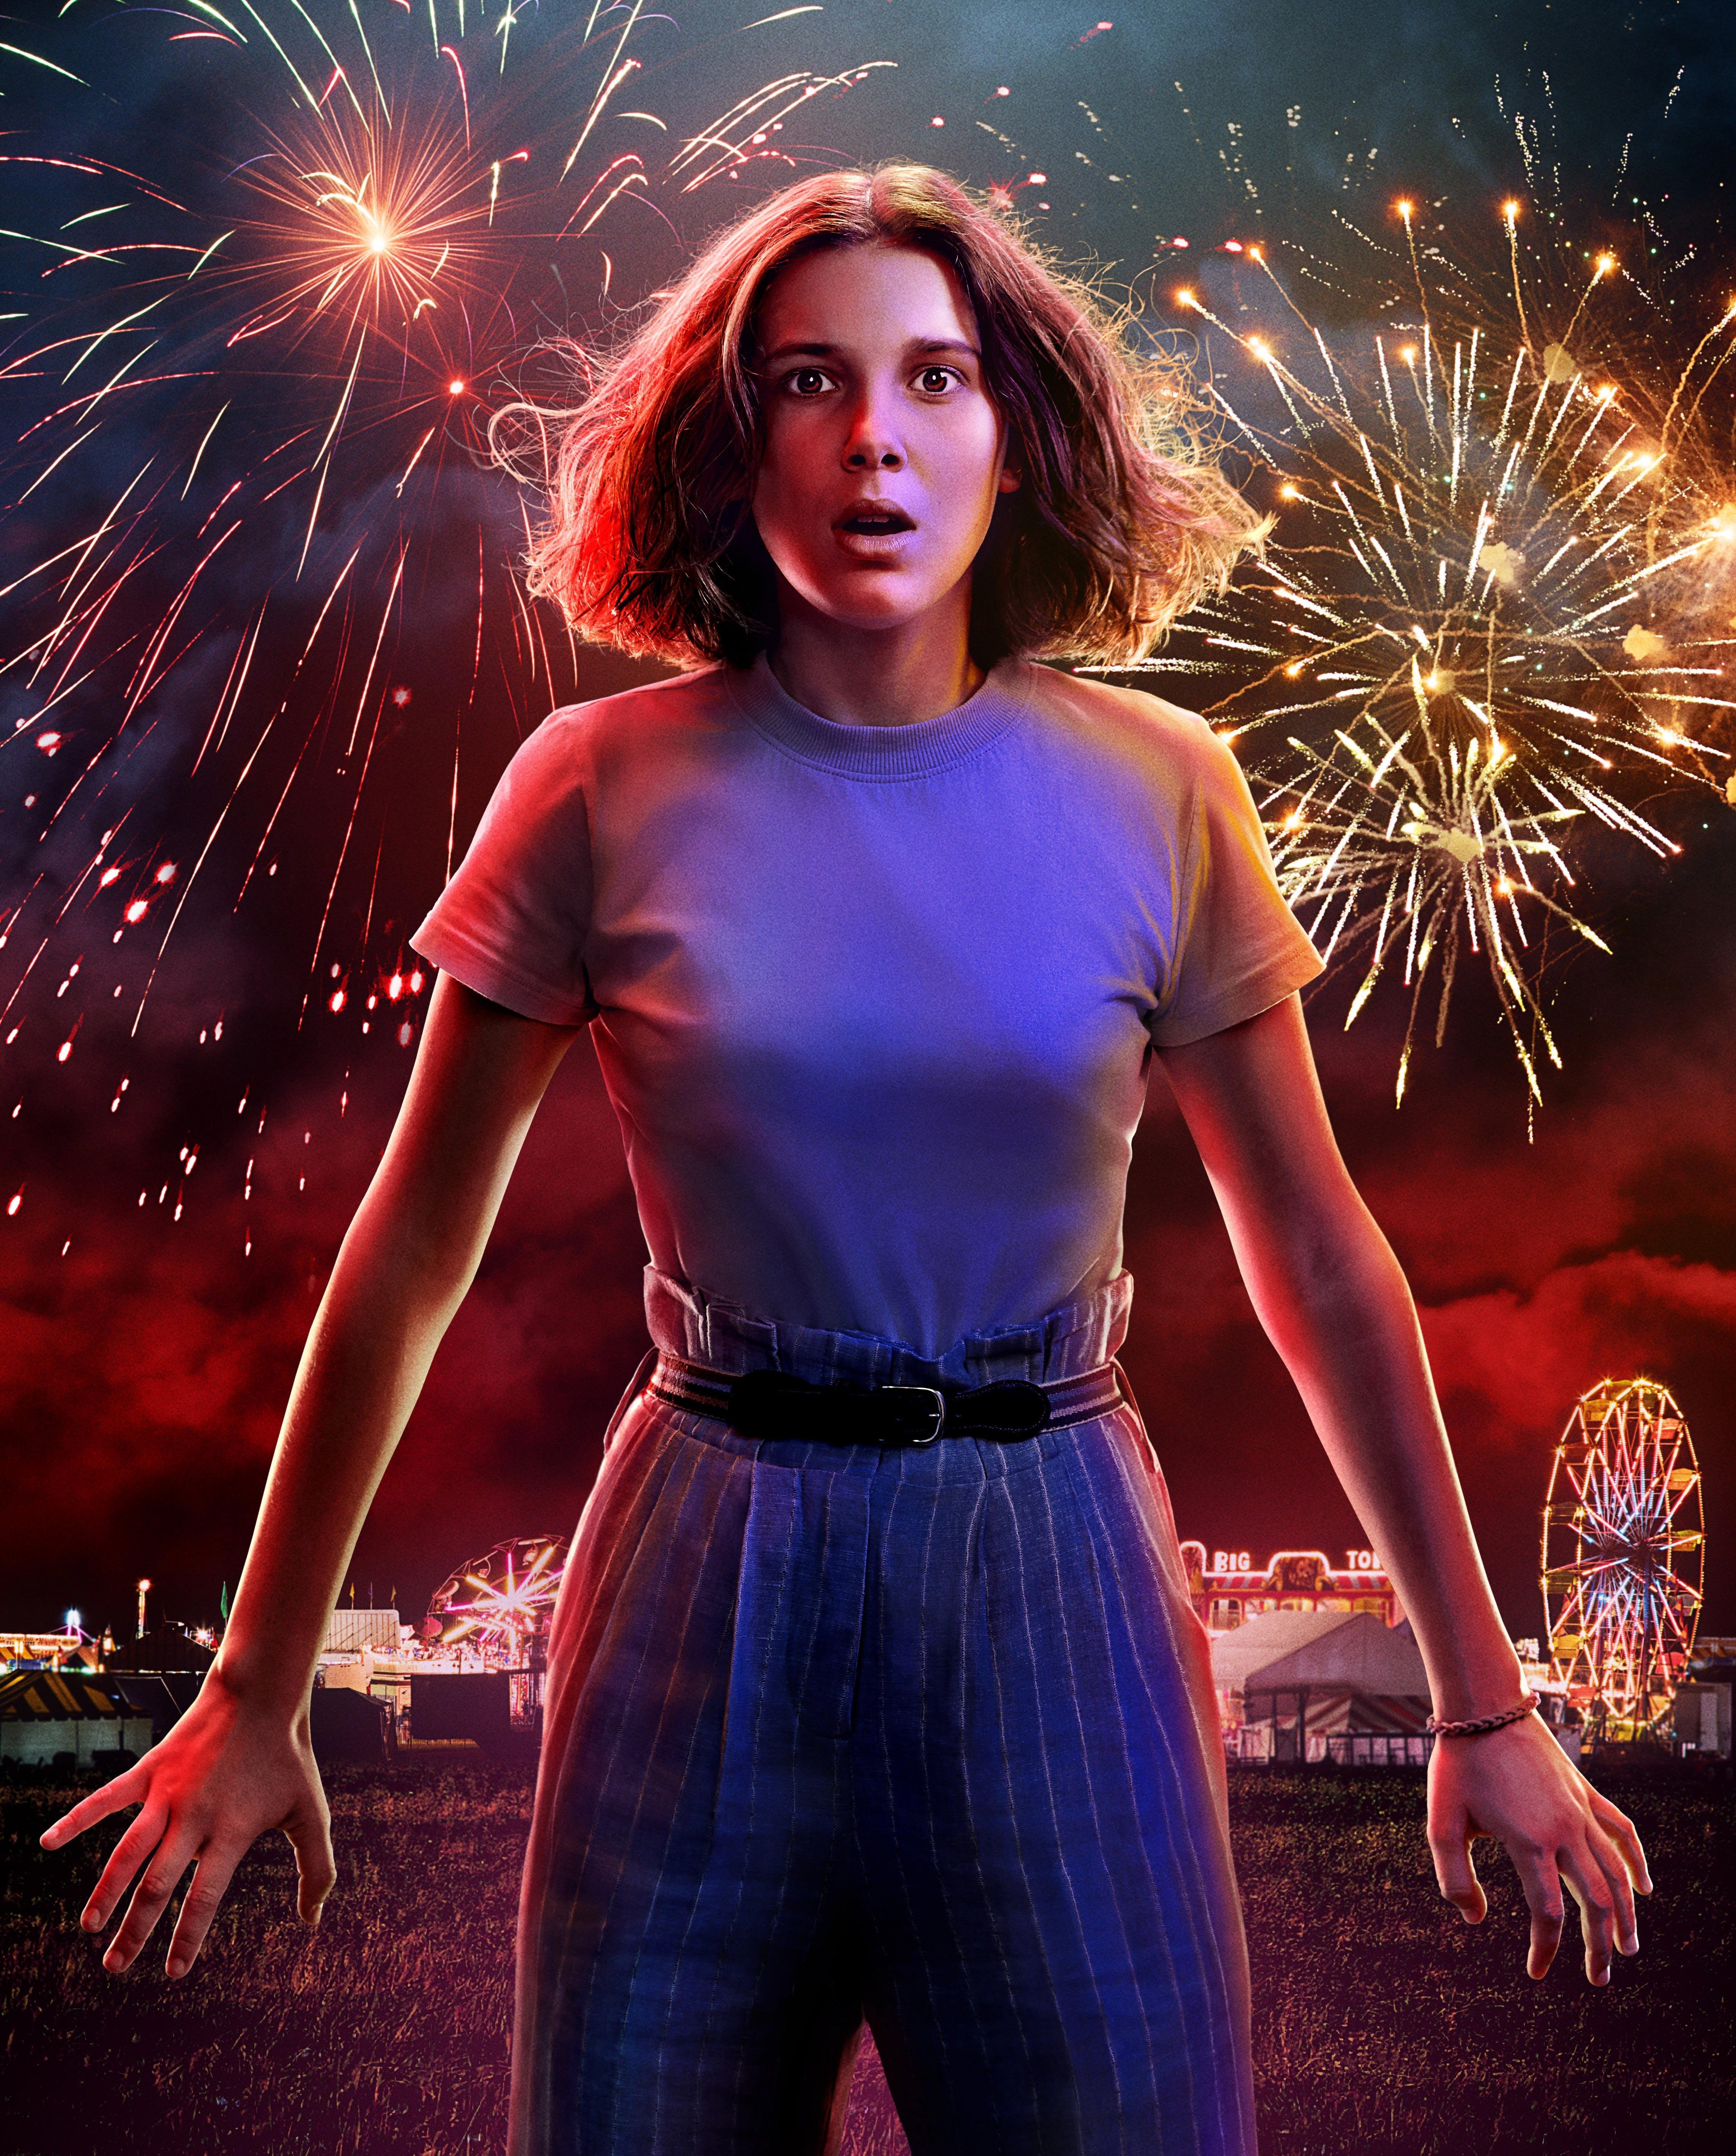 Millie Bobby Brown As Eleven Stranger Things 3 Poster iPhone XS MAX Wallpaper, HD TV Series 4K Wallpaper, Image, Photo and Background